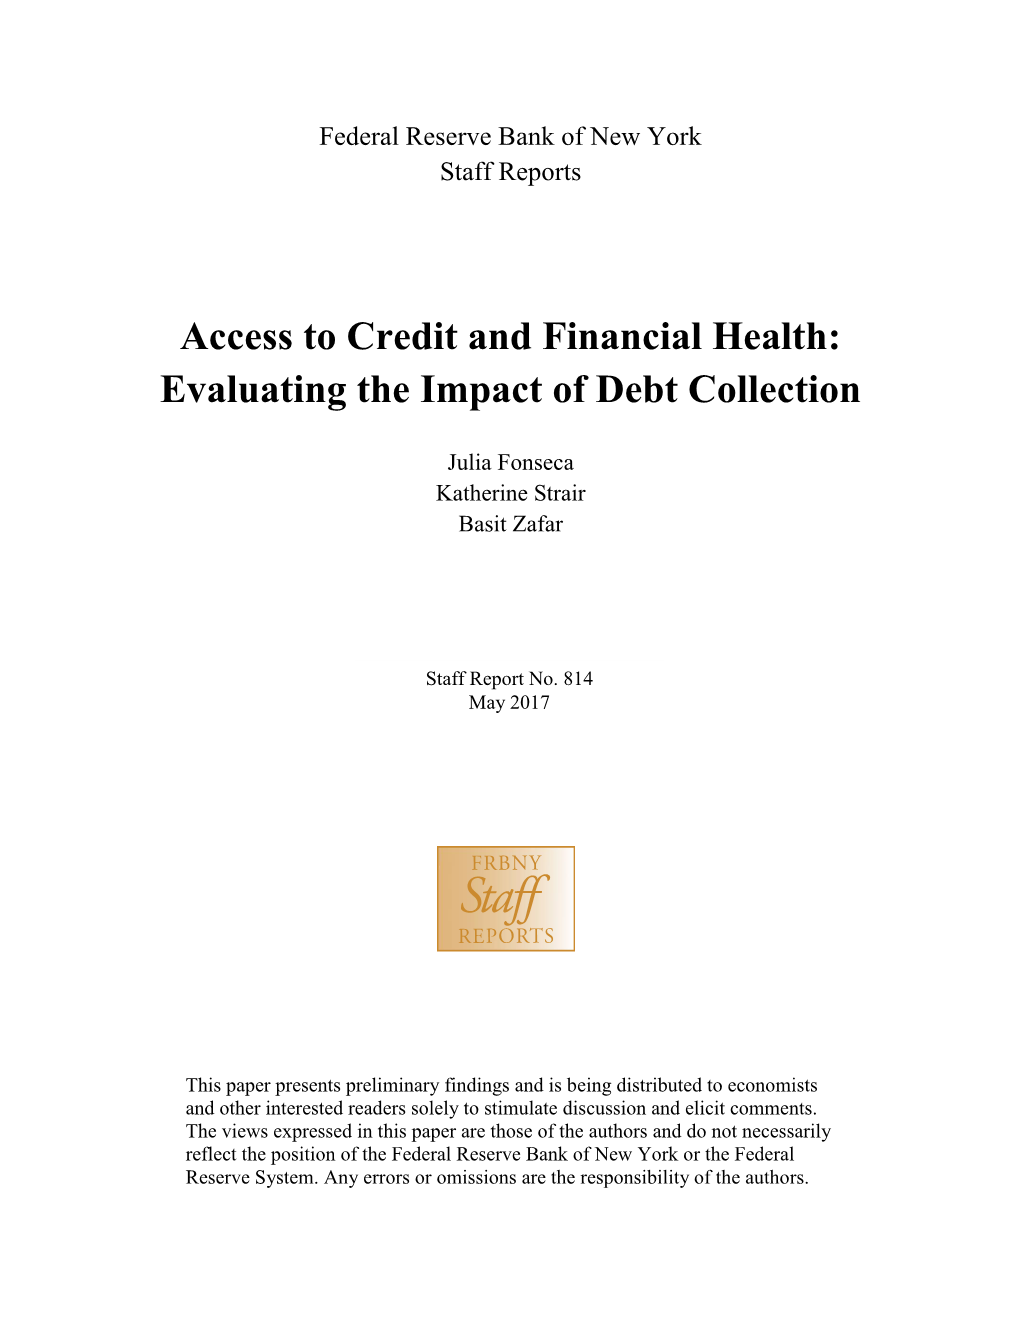 Access to Credit and Financial Health: Evaluating the Impact of Debt Collection